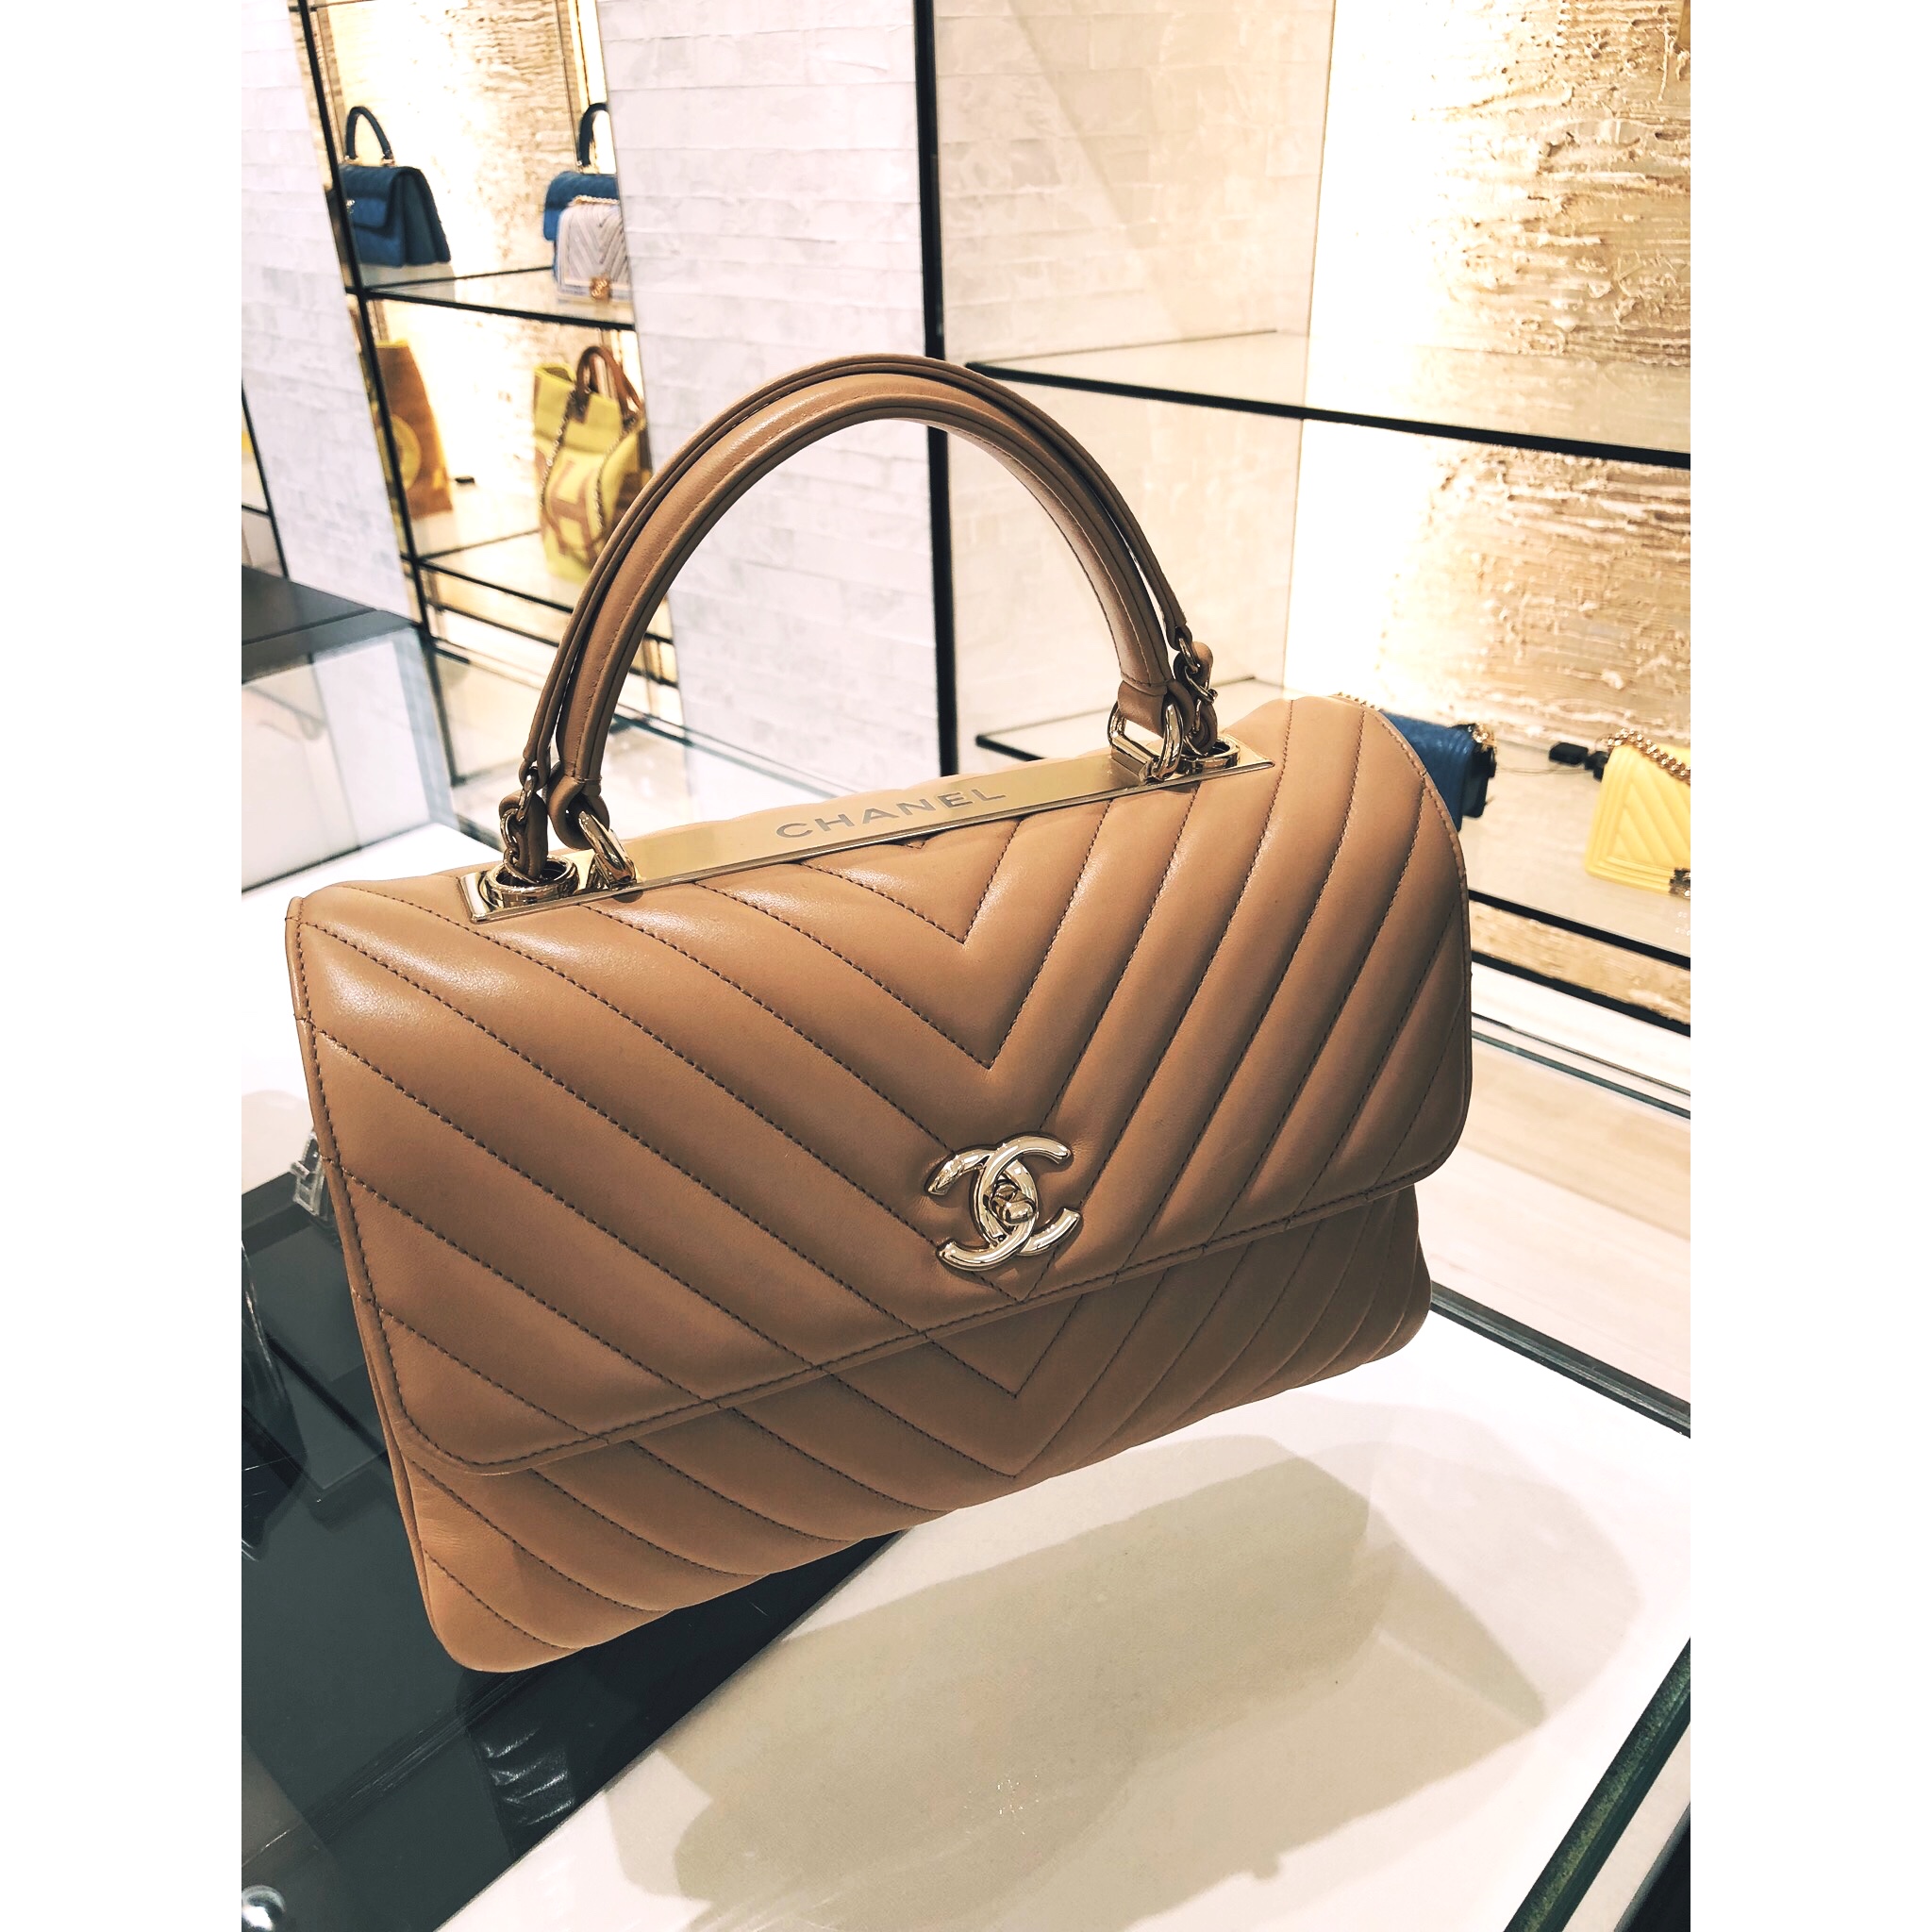 Chanel bag — Blog — The Daily Darlings